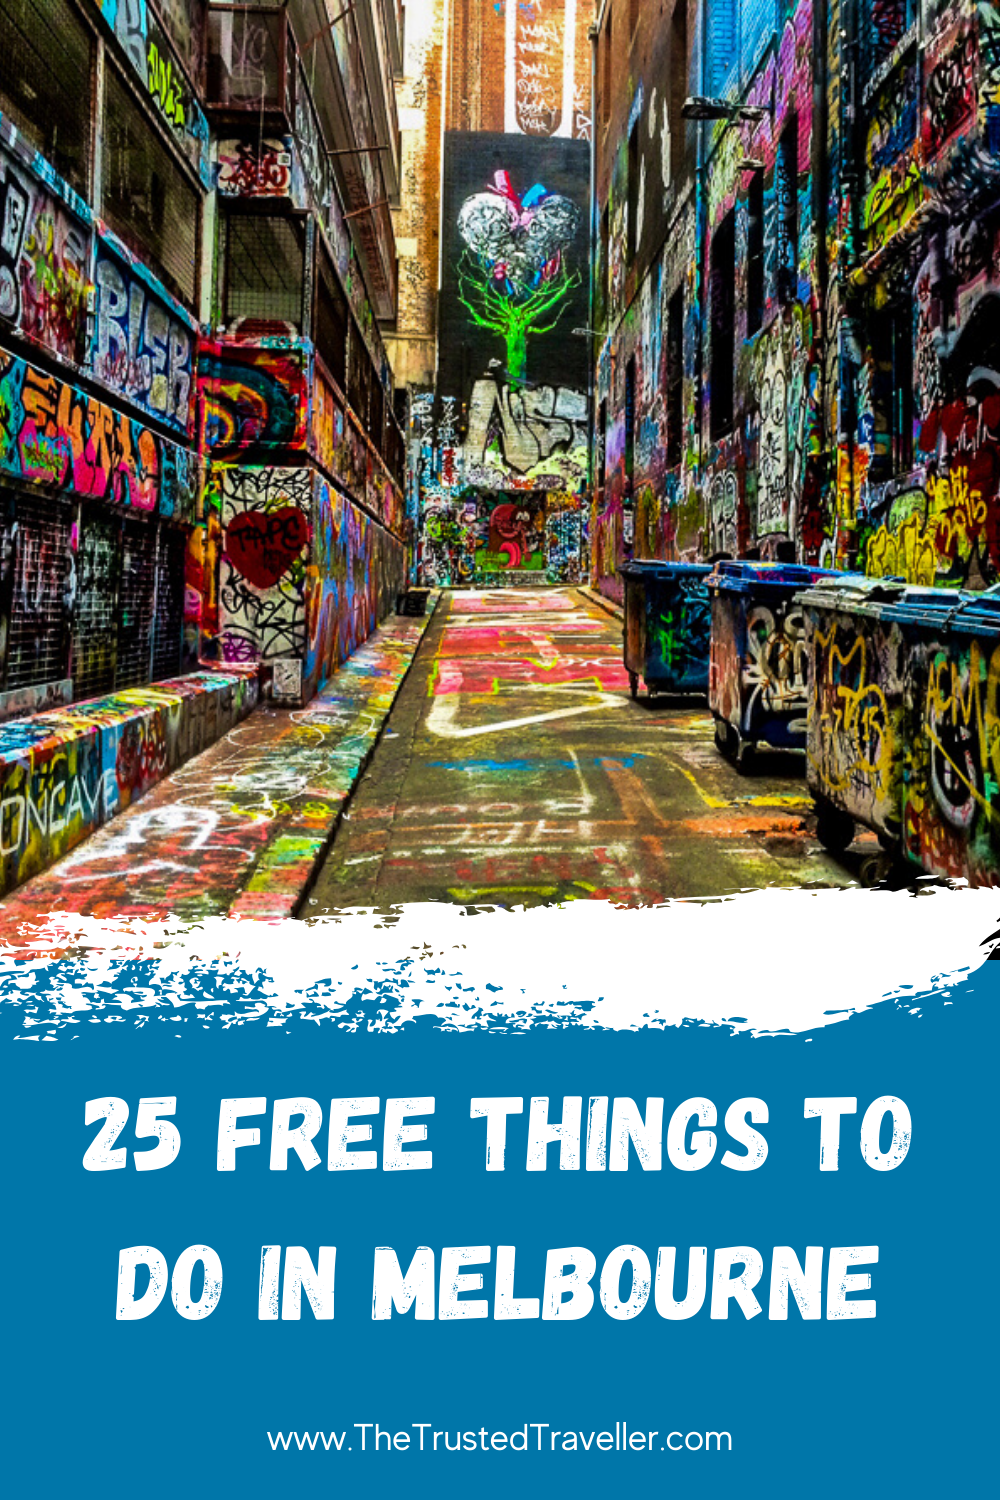 25 Free Things to Do in Melbourne - The Trusted Traveller